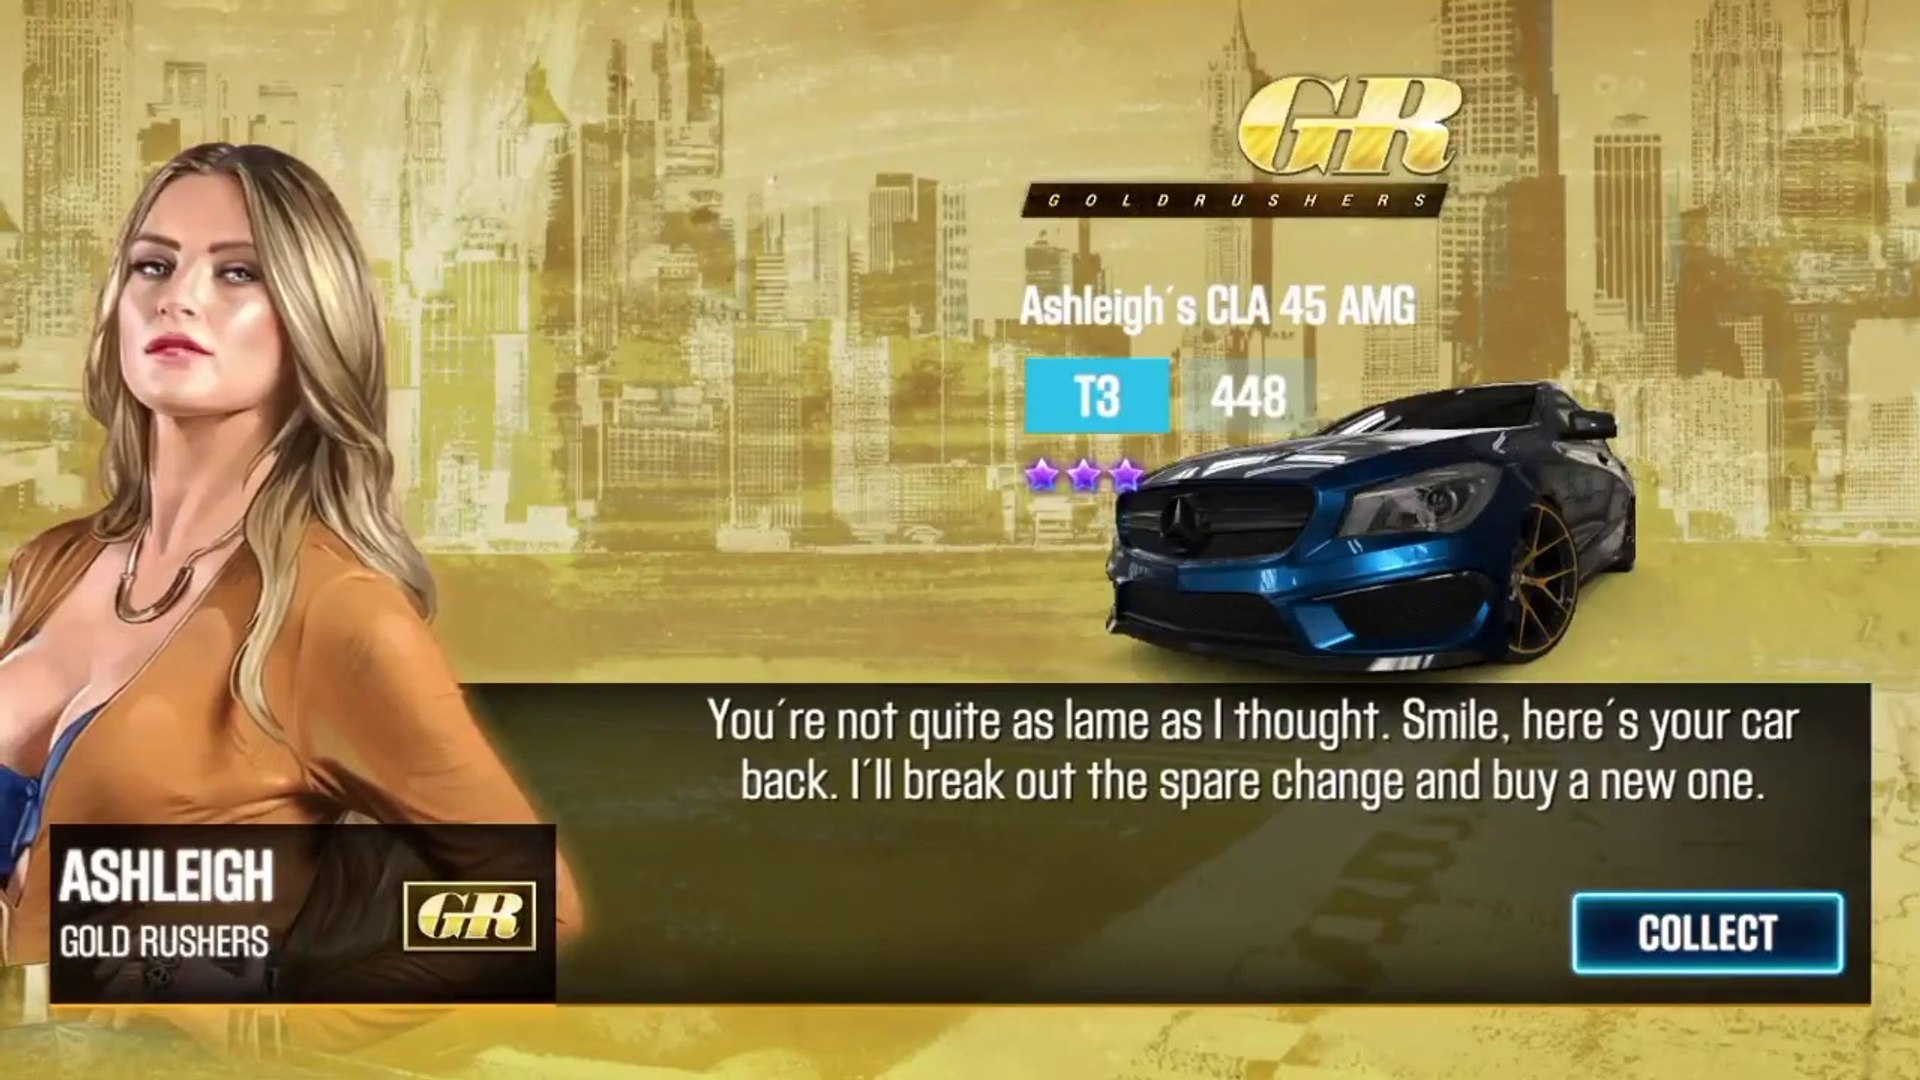 CSR Racing 2 | Battle win Tier 2 boss's car (Ashleigh's CLA 45 AMG)with Lotus Exige Sport - Dailymotion